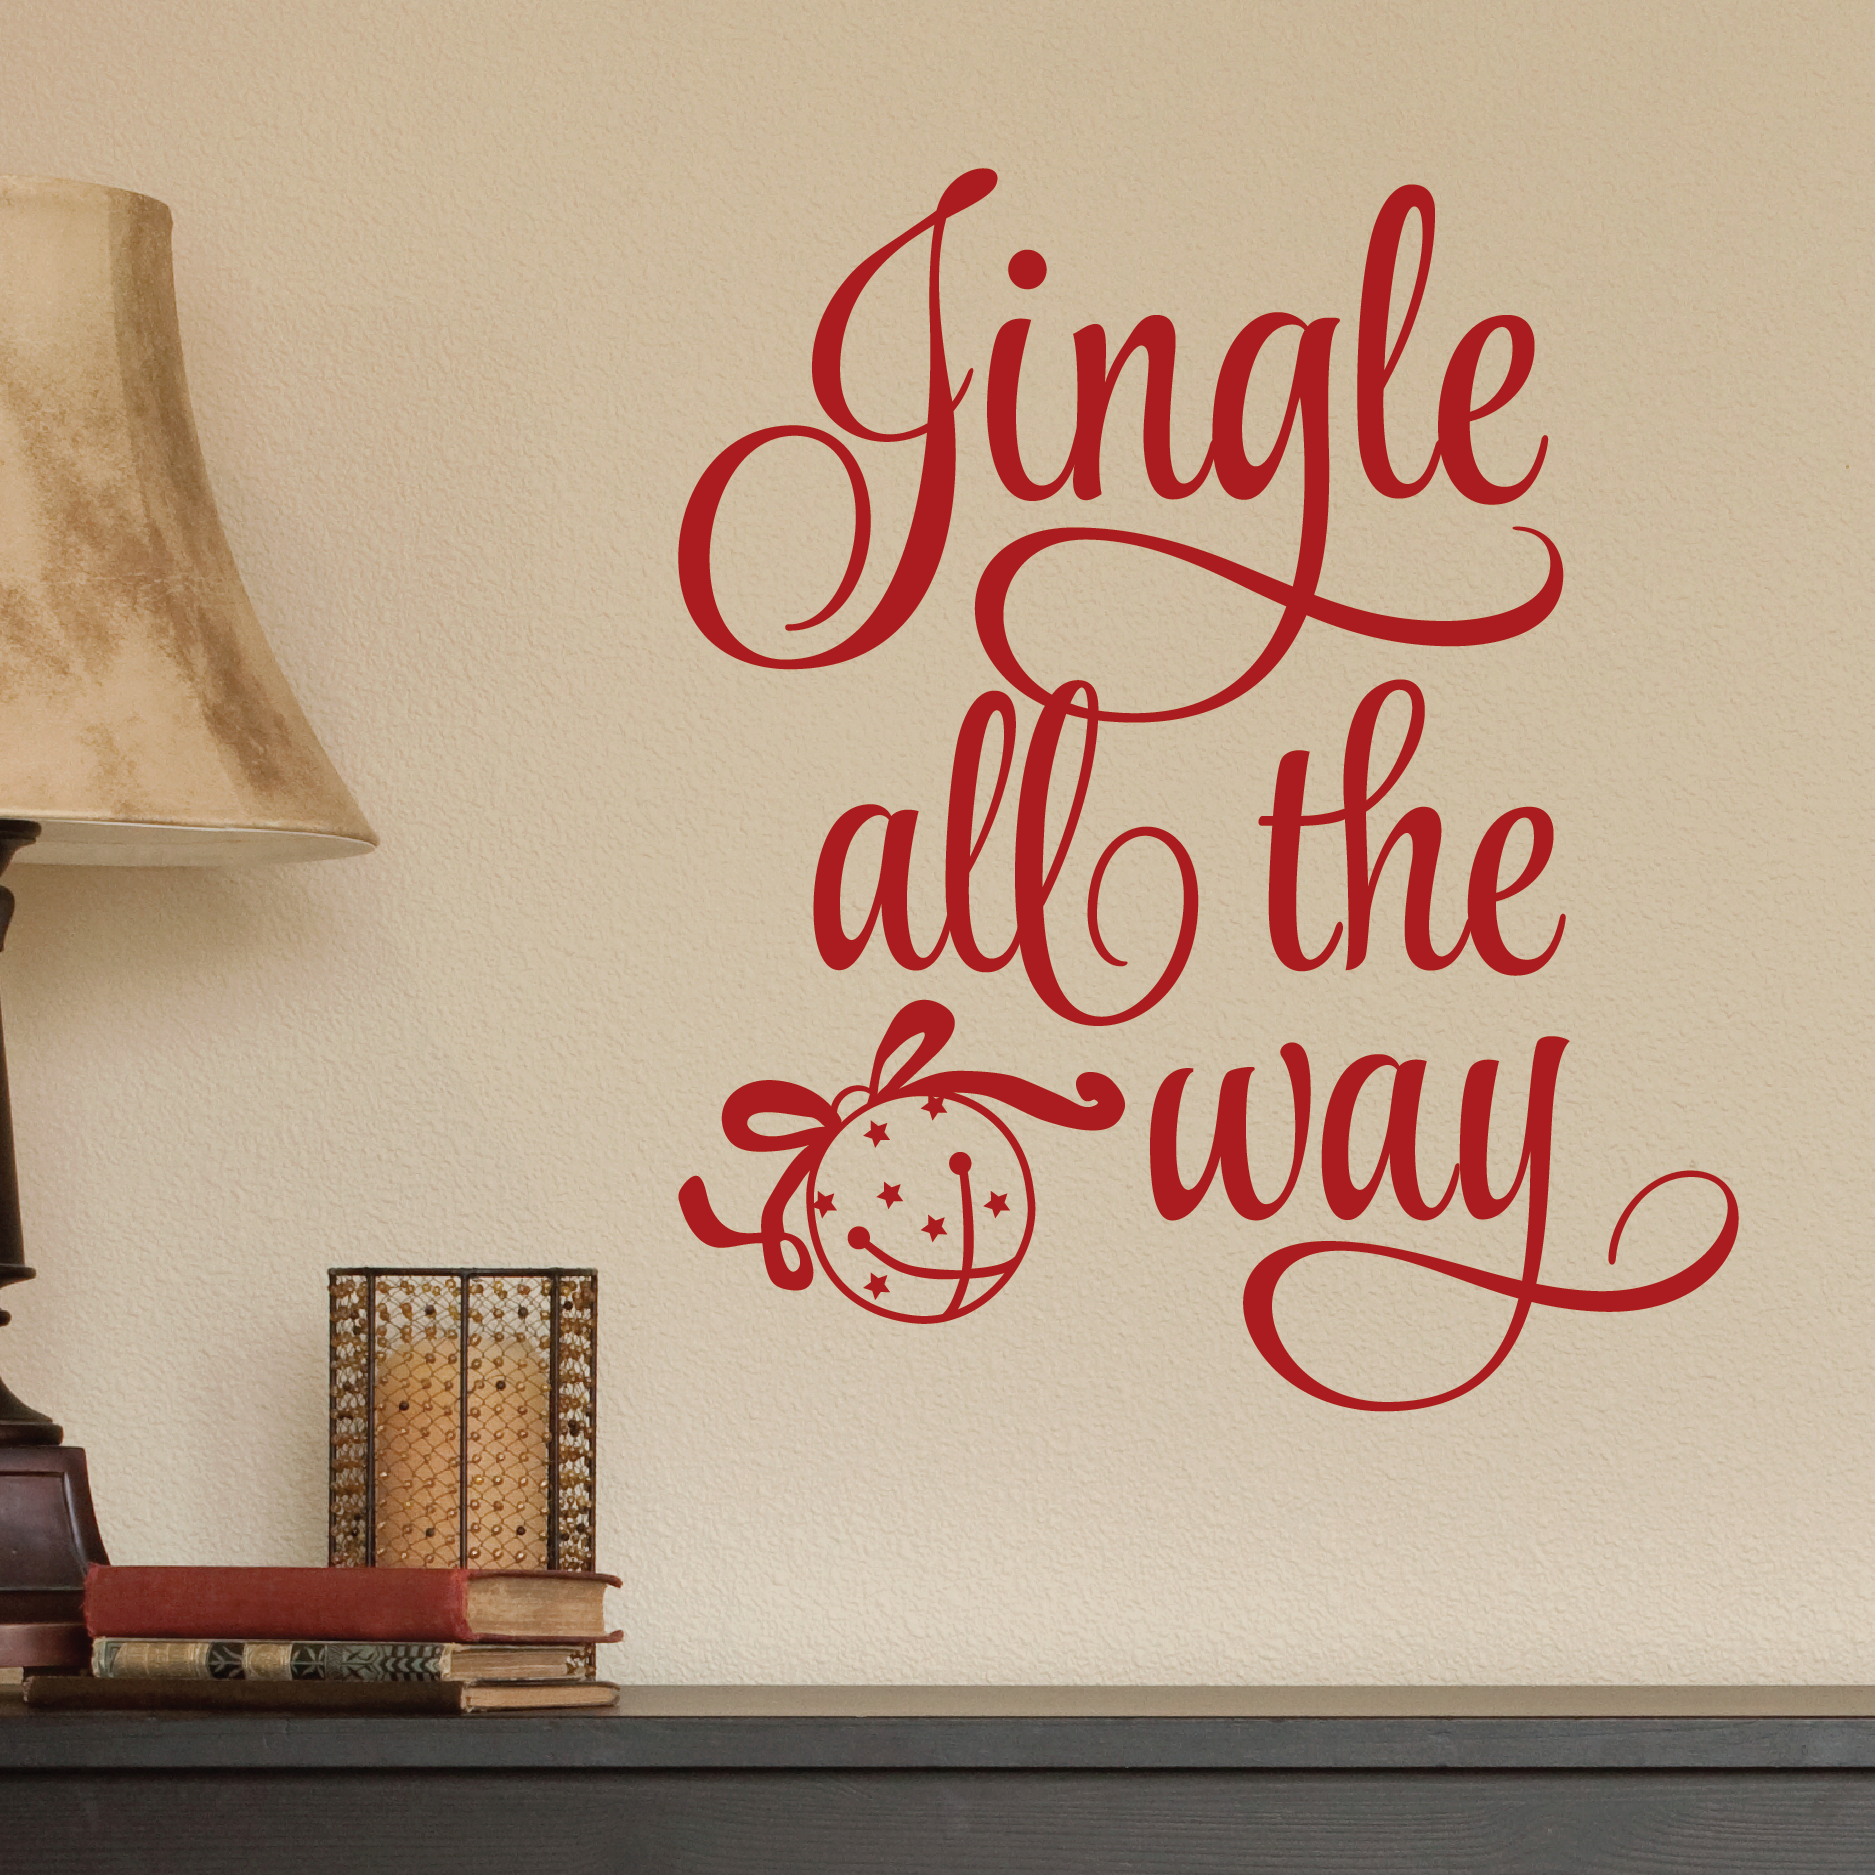 Compartir 136+ imagen jingle all the way background - Thcshoanghoatham ...